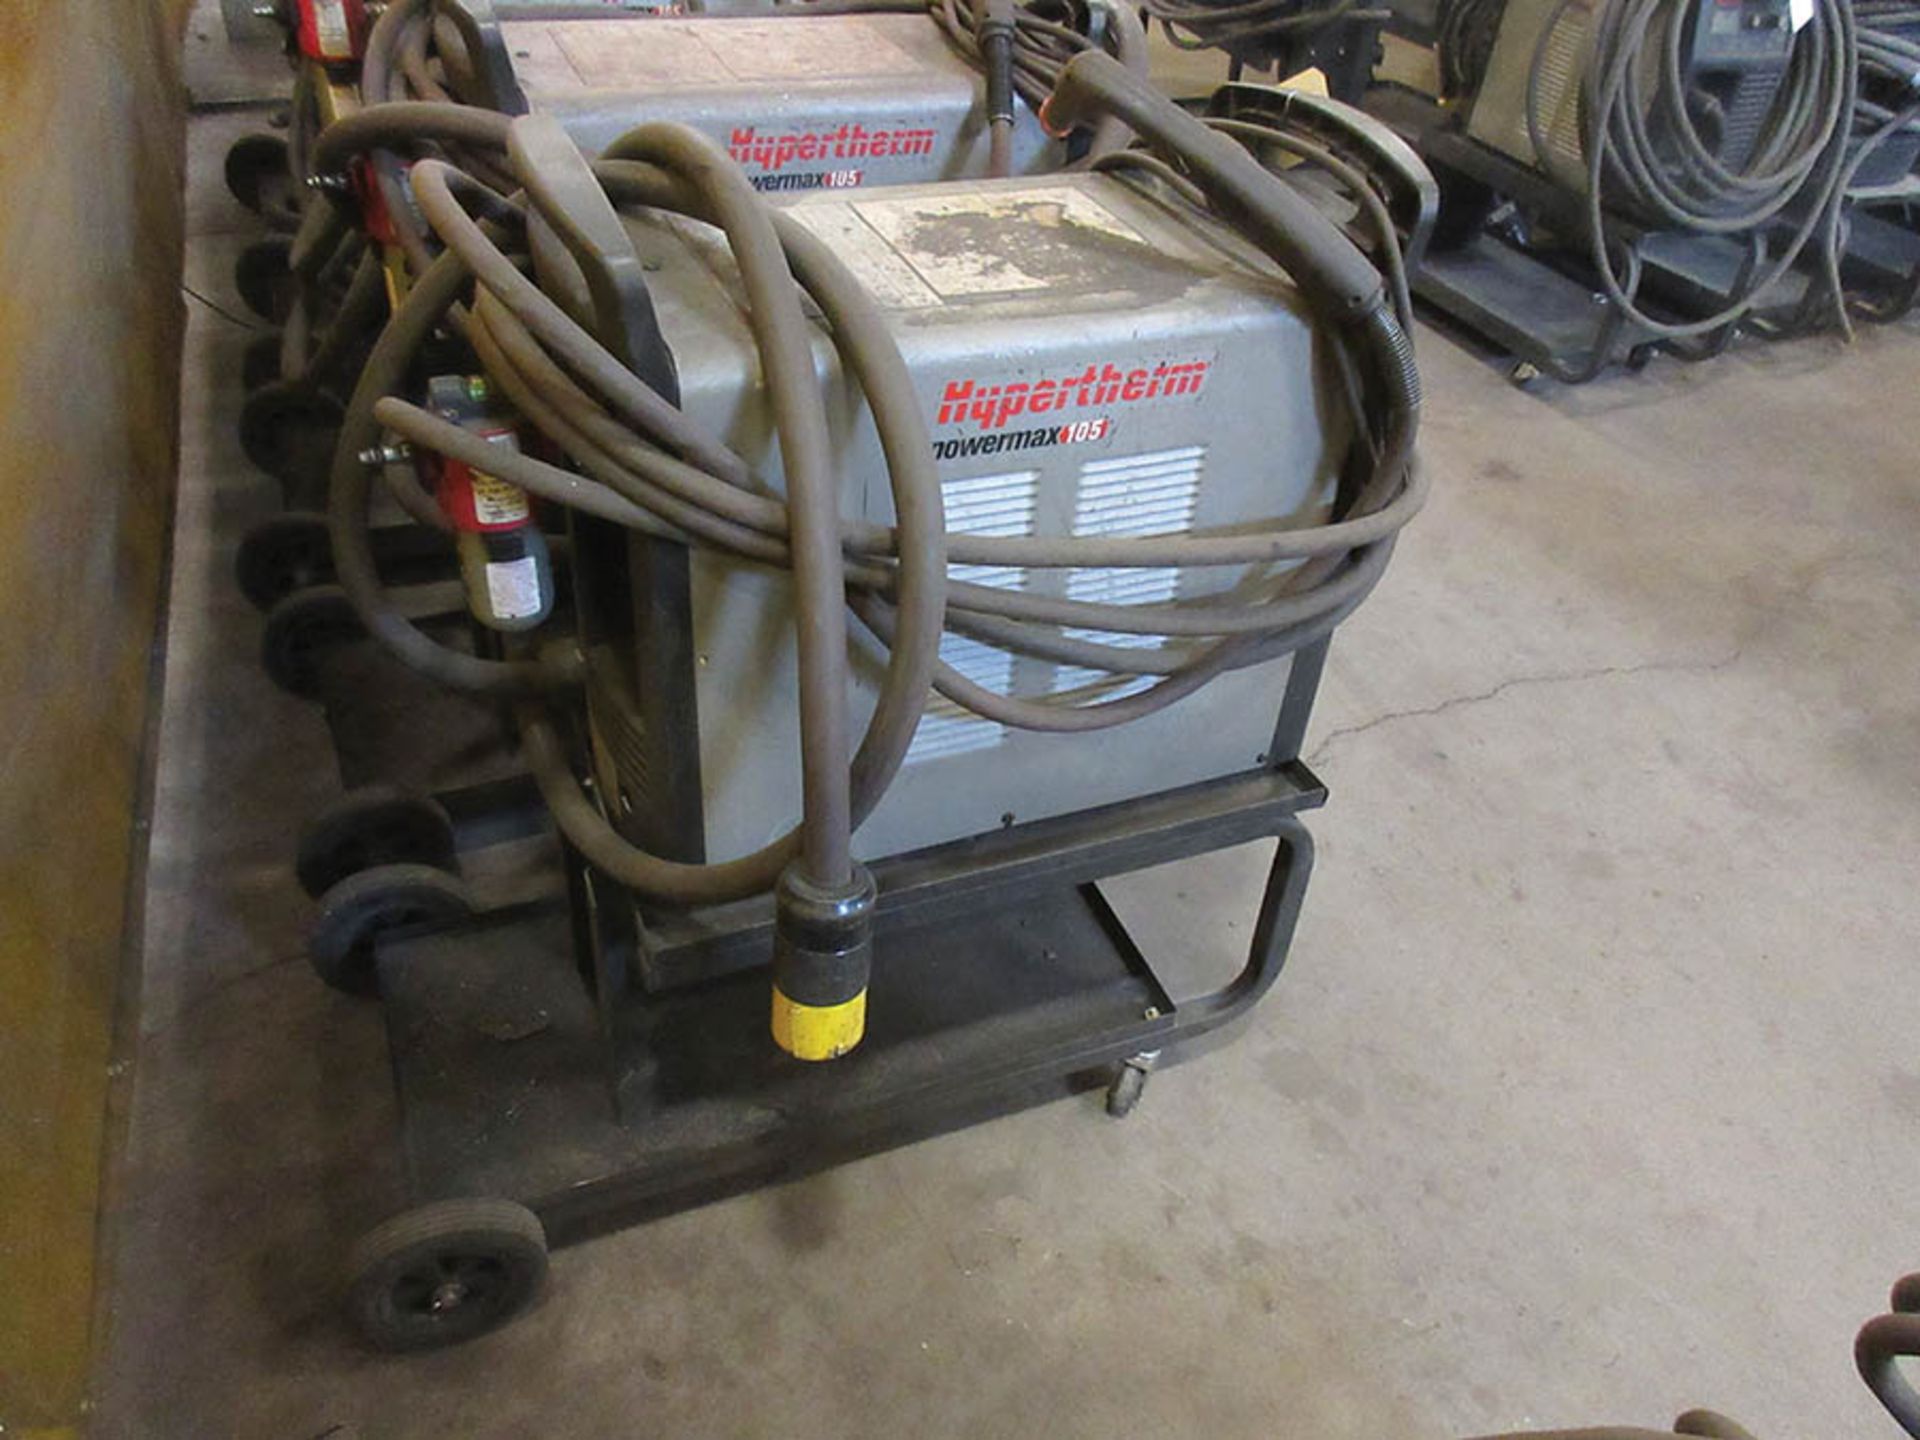 HYPERTHERM POWERMAX 105 PLASMA CUTTER WITH HAND TORCH - Image 2 of 3